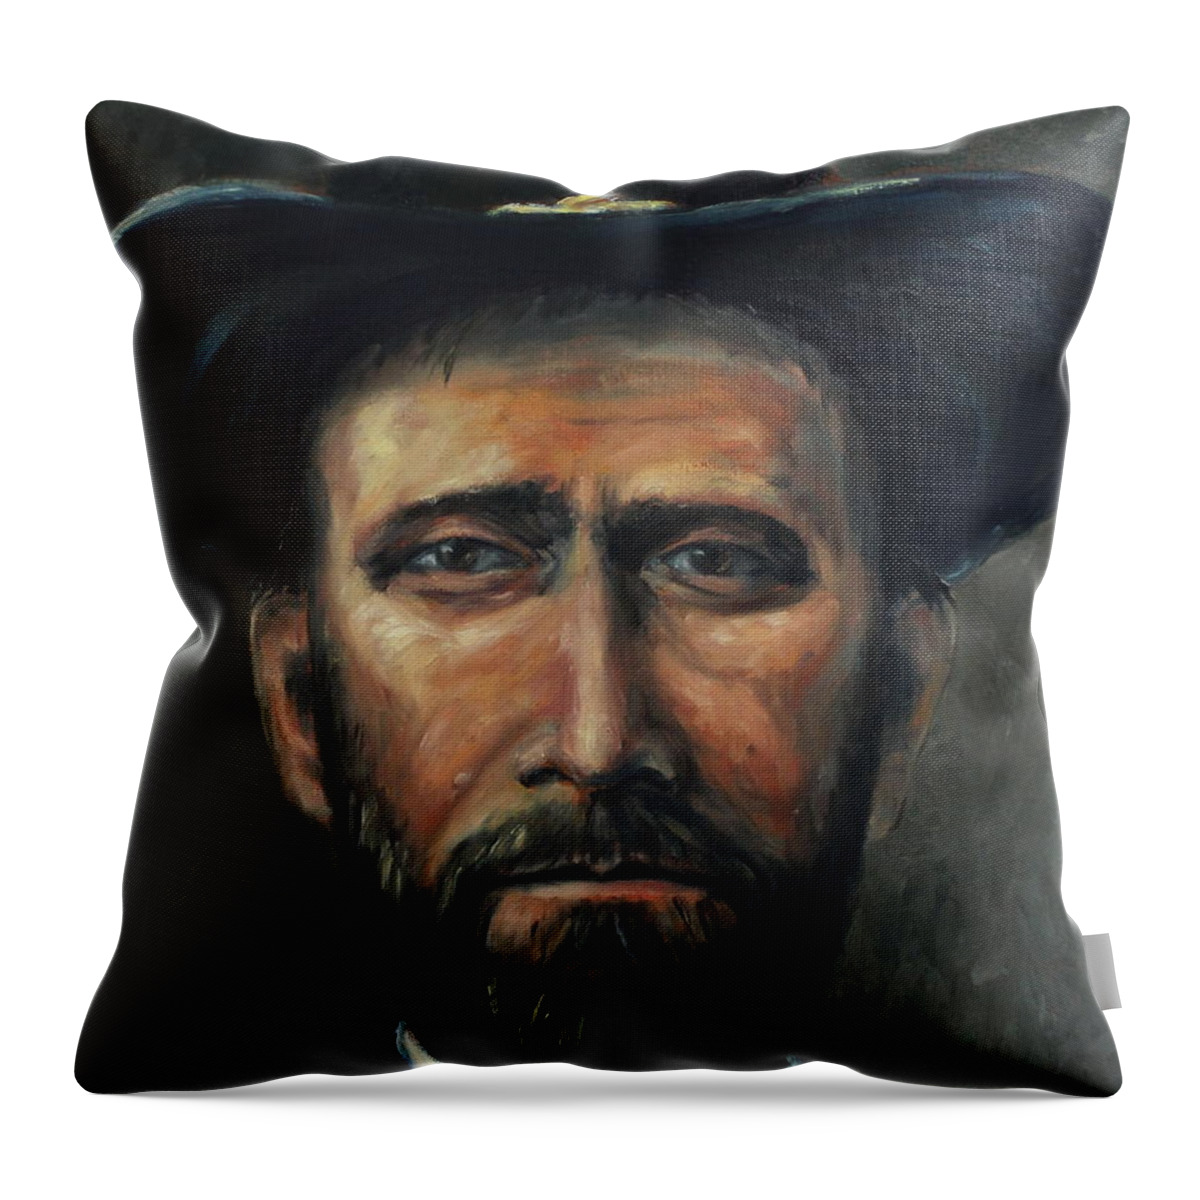 Ulysses S. Grant Throw Pillow featuring the painting Ulysses S. Grant by Daniel W Green